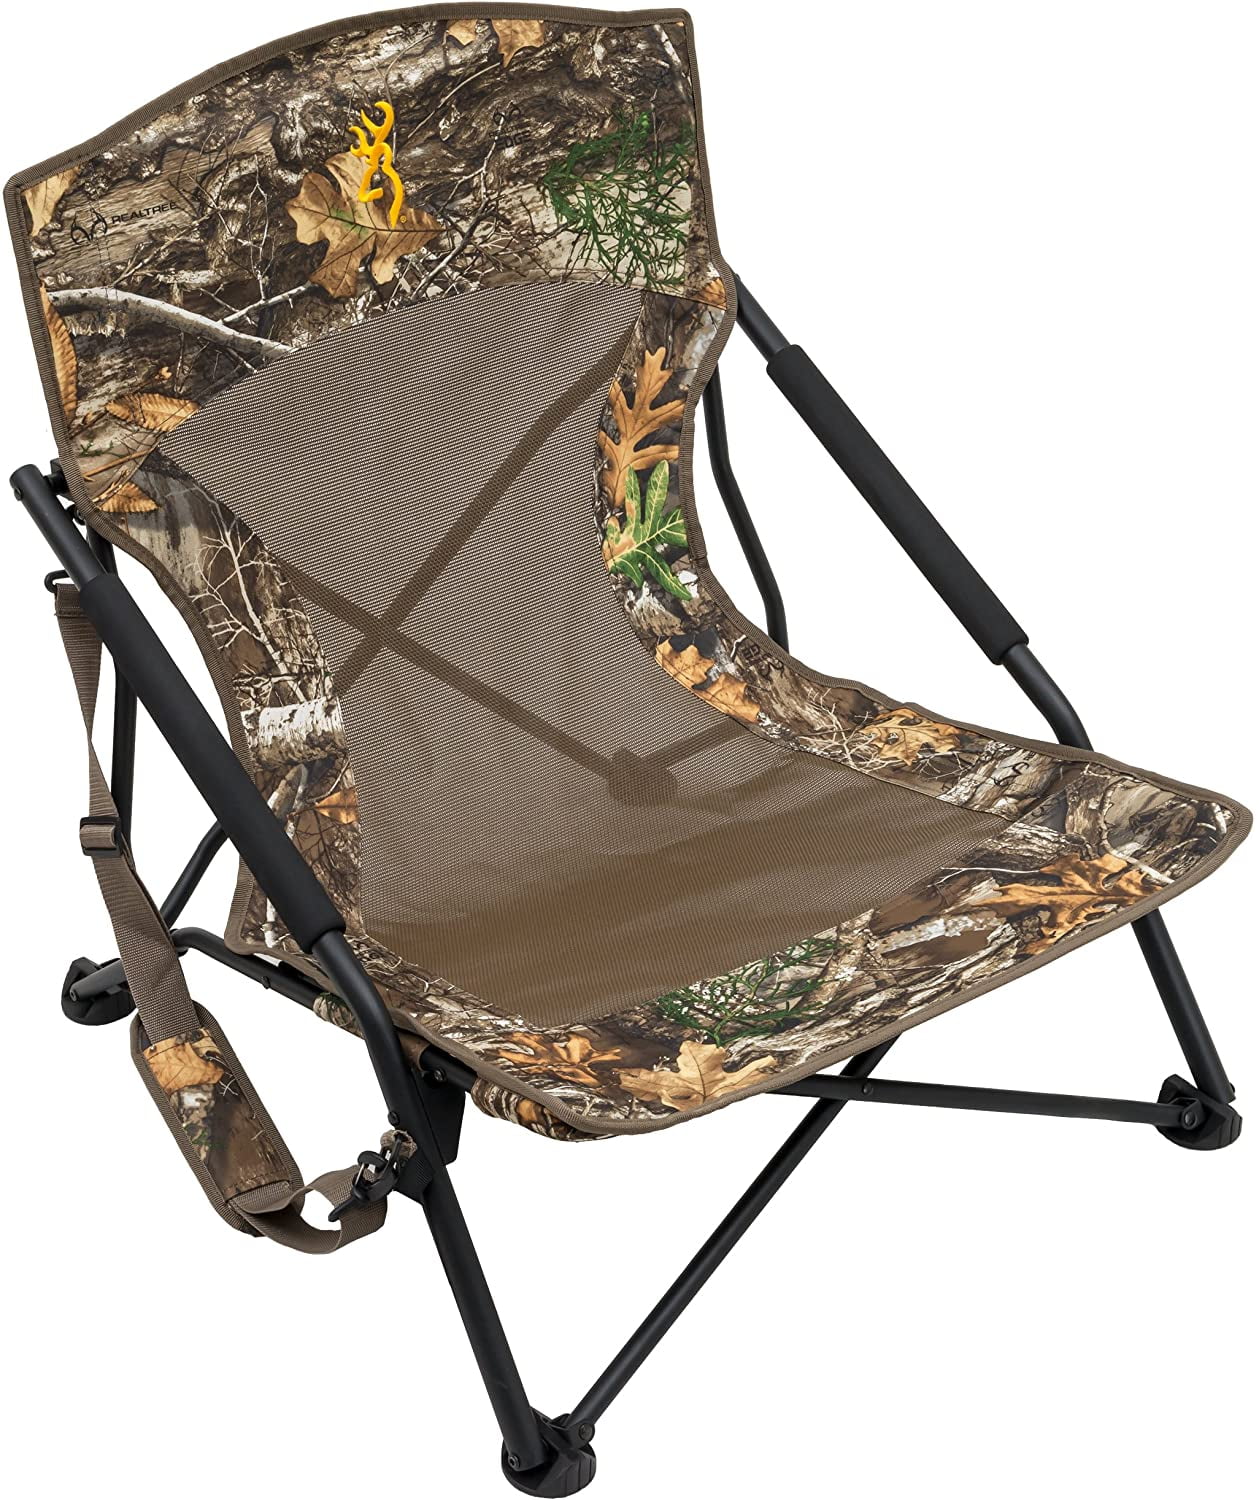 browning hunting chair